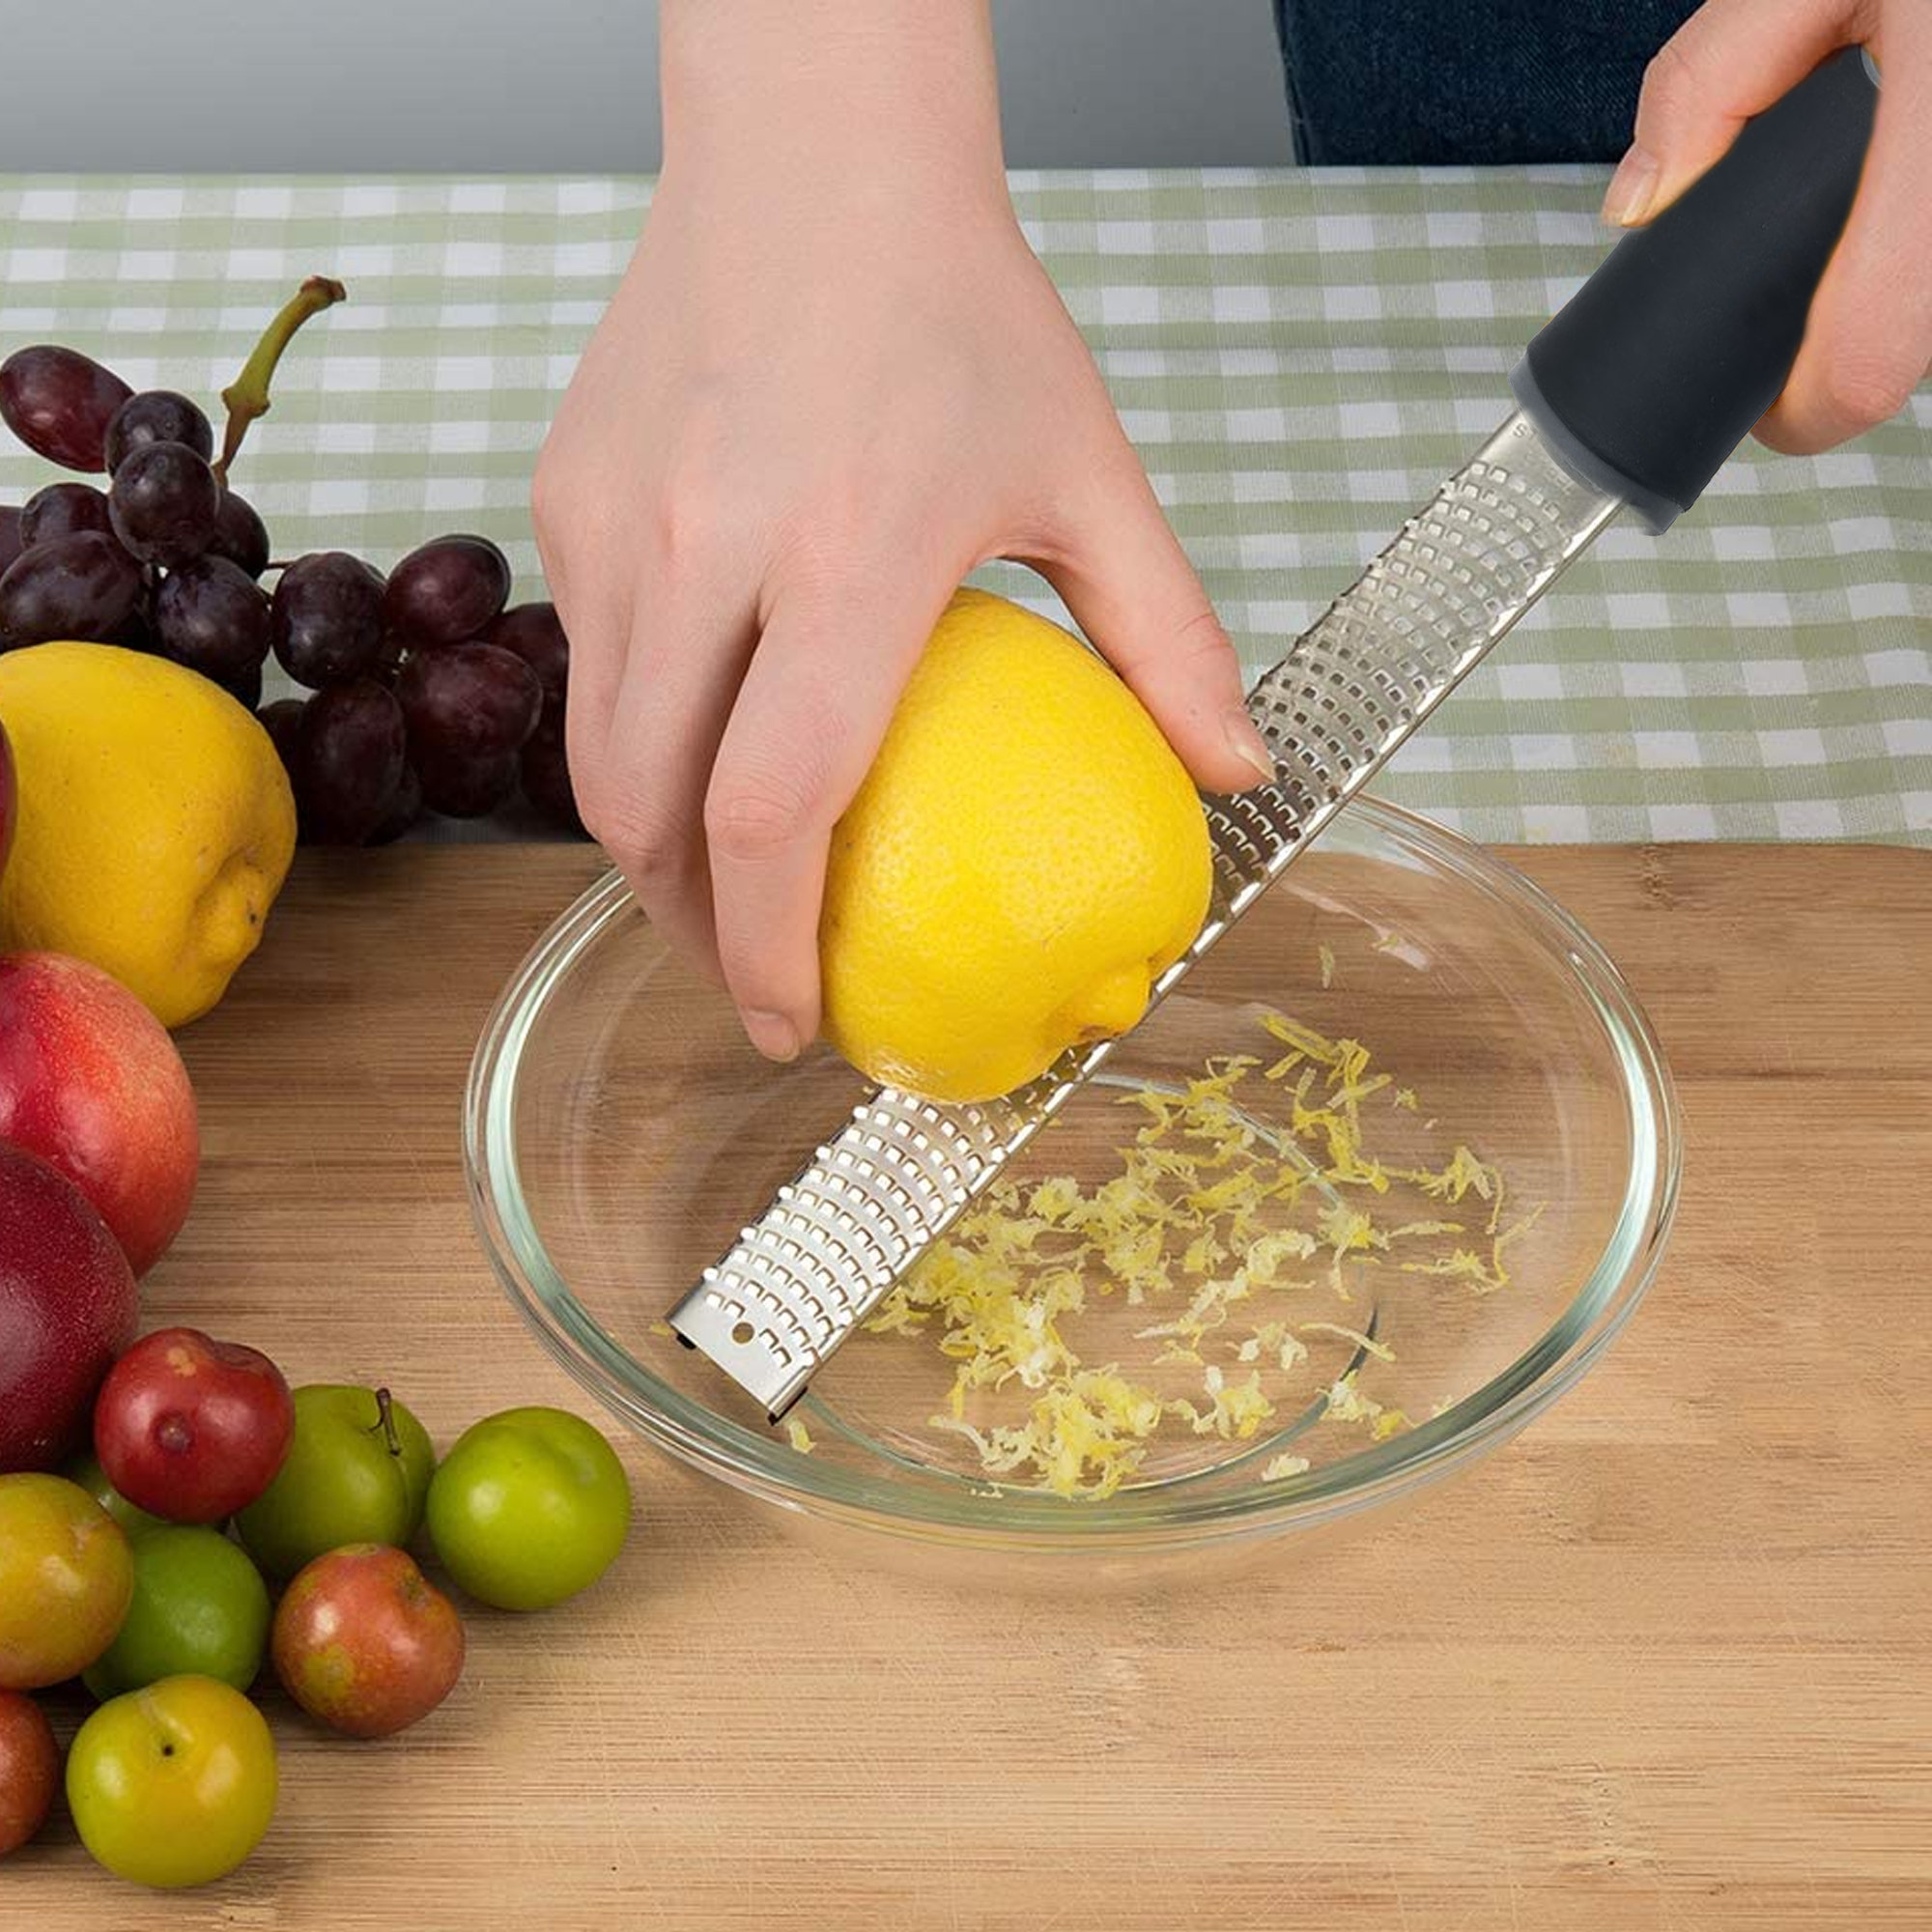 Stainless Steel Kitchen Cheese Grater With Black Handle And Small Brush